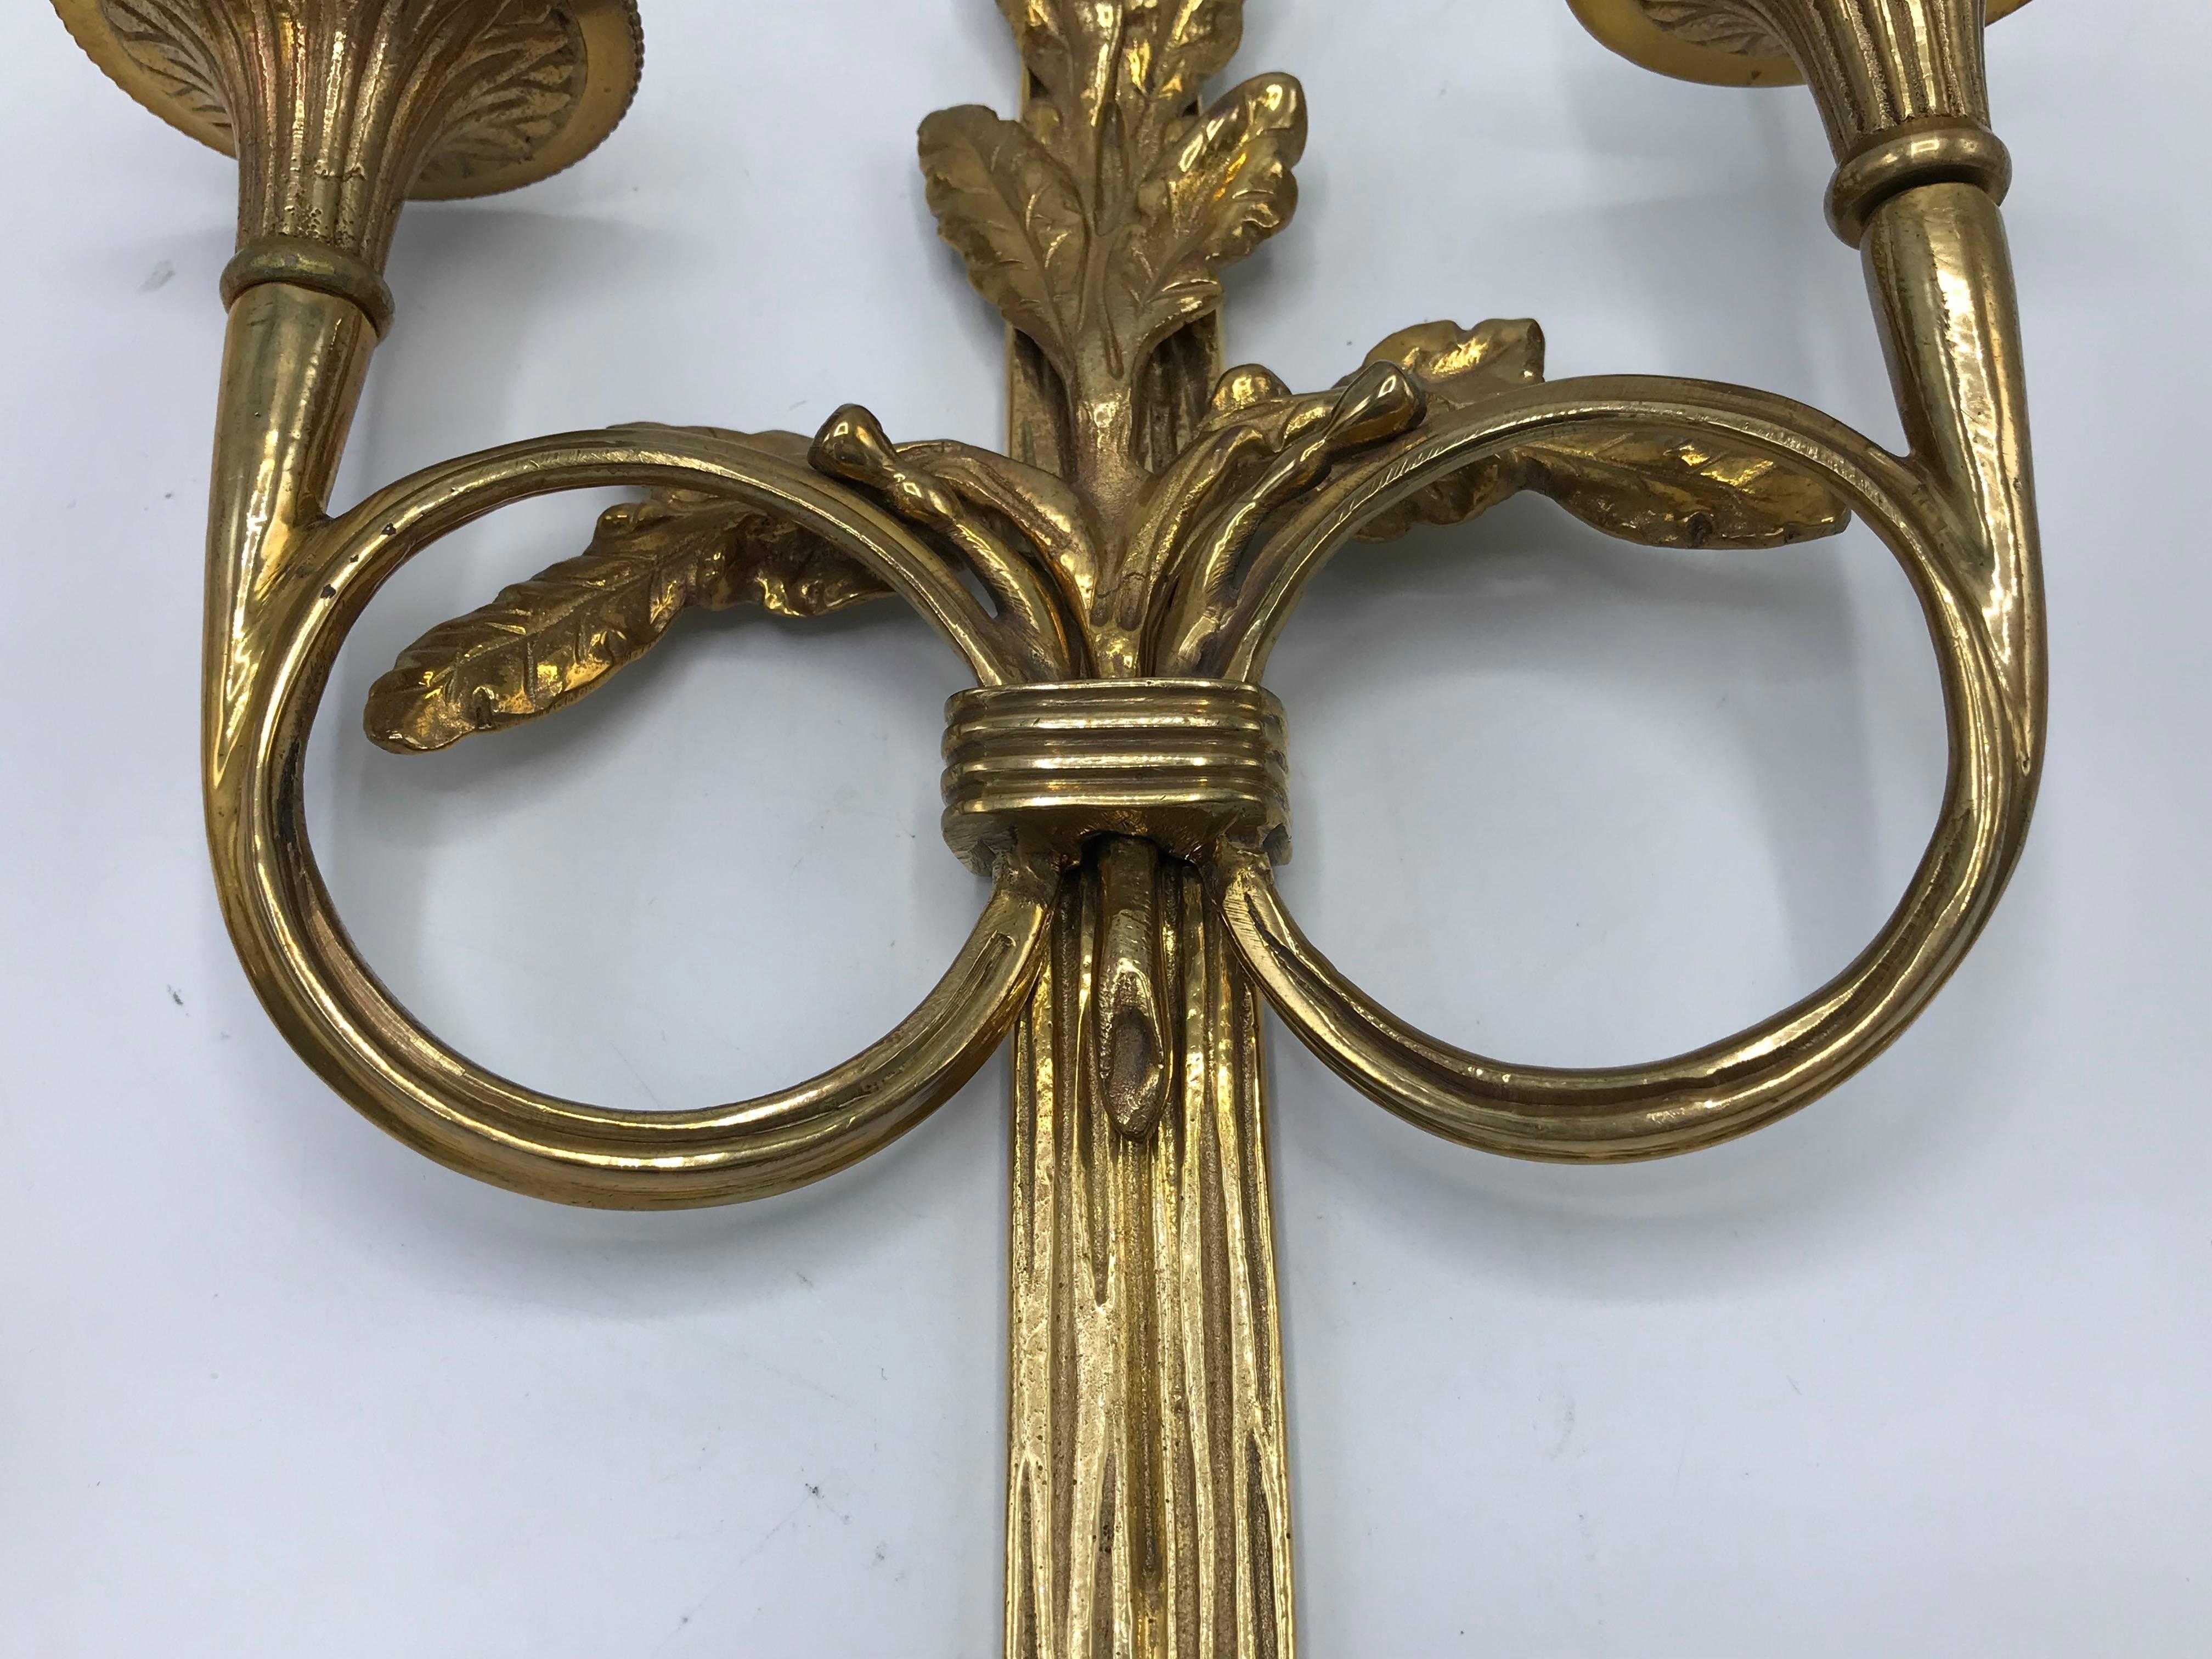 1960s Italian Brass Candlestick Wall Sconces with Tassel and Bow Motif, Pair 1